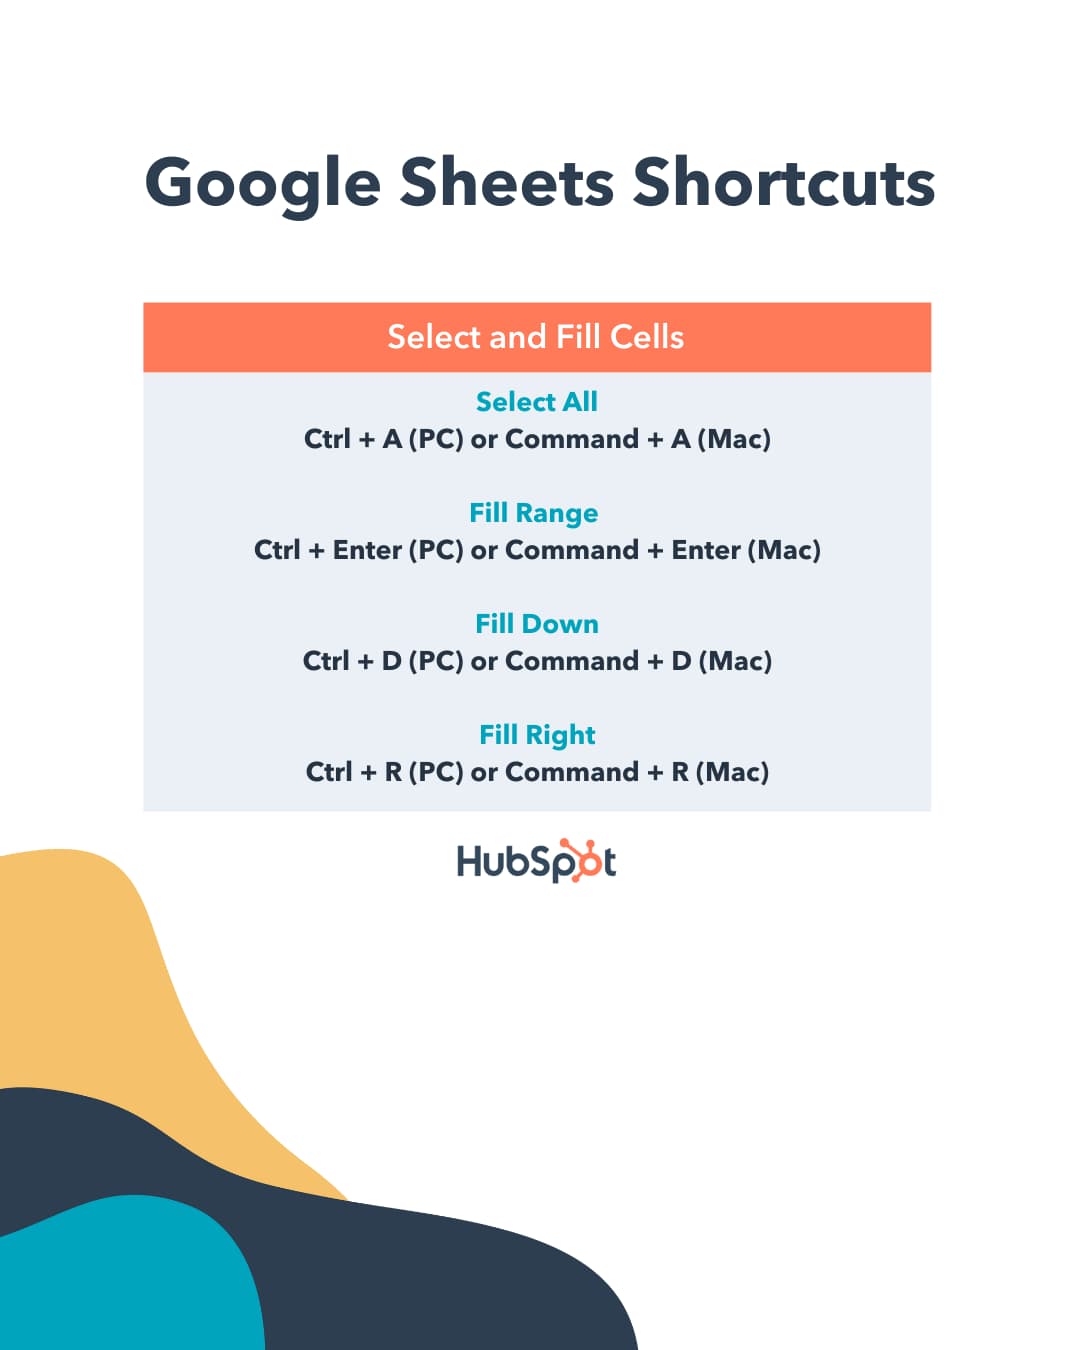 How to use Google Sheets shortcuts to select all, fill range, fill down, and fill right. 